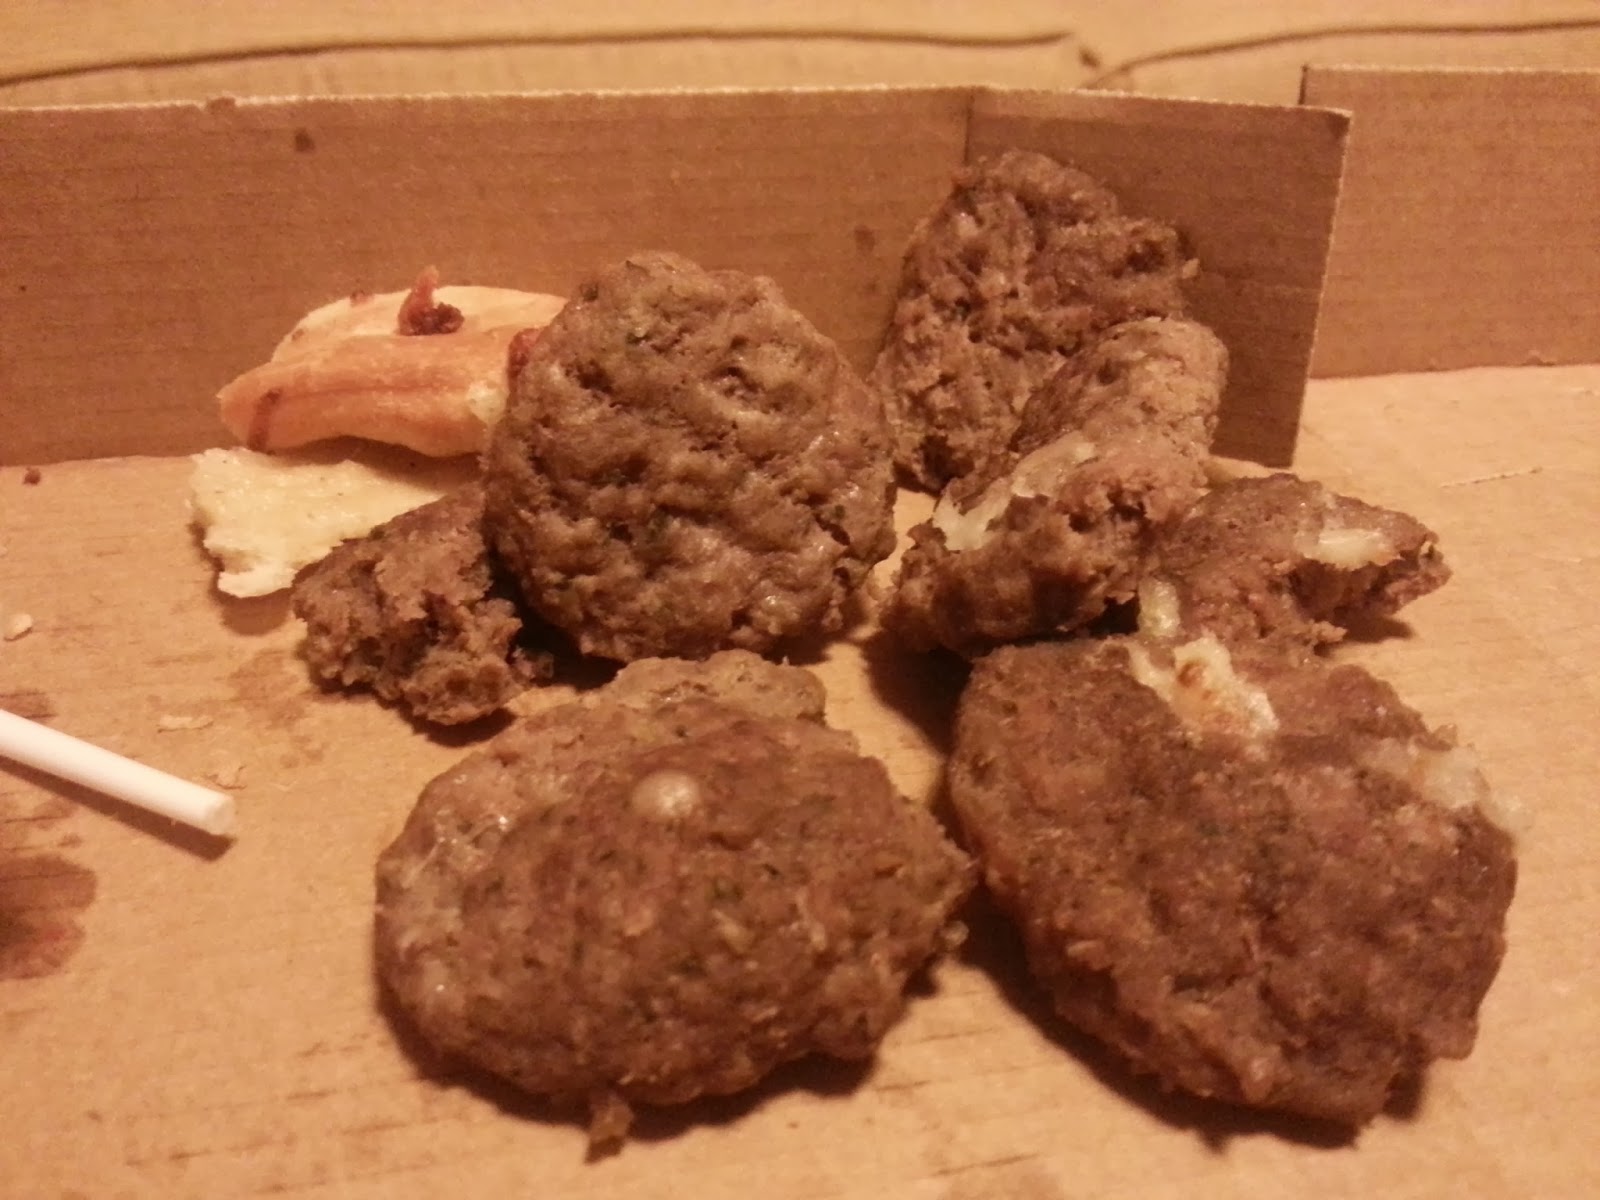 The burgers from Pizza Hut's cheeseburger pizza. Almost unpalatable.